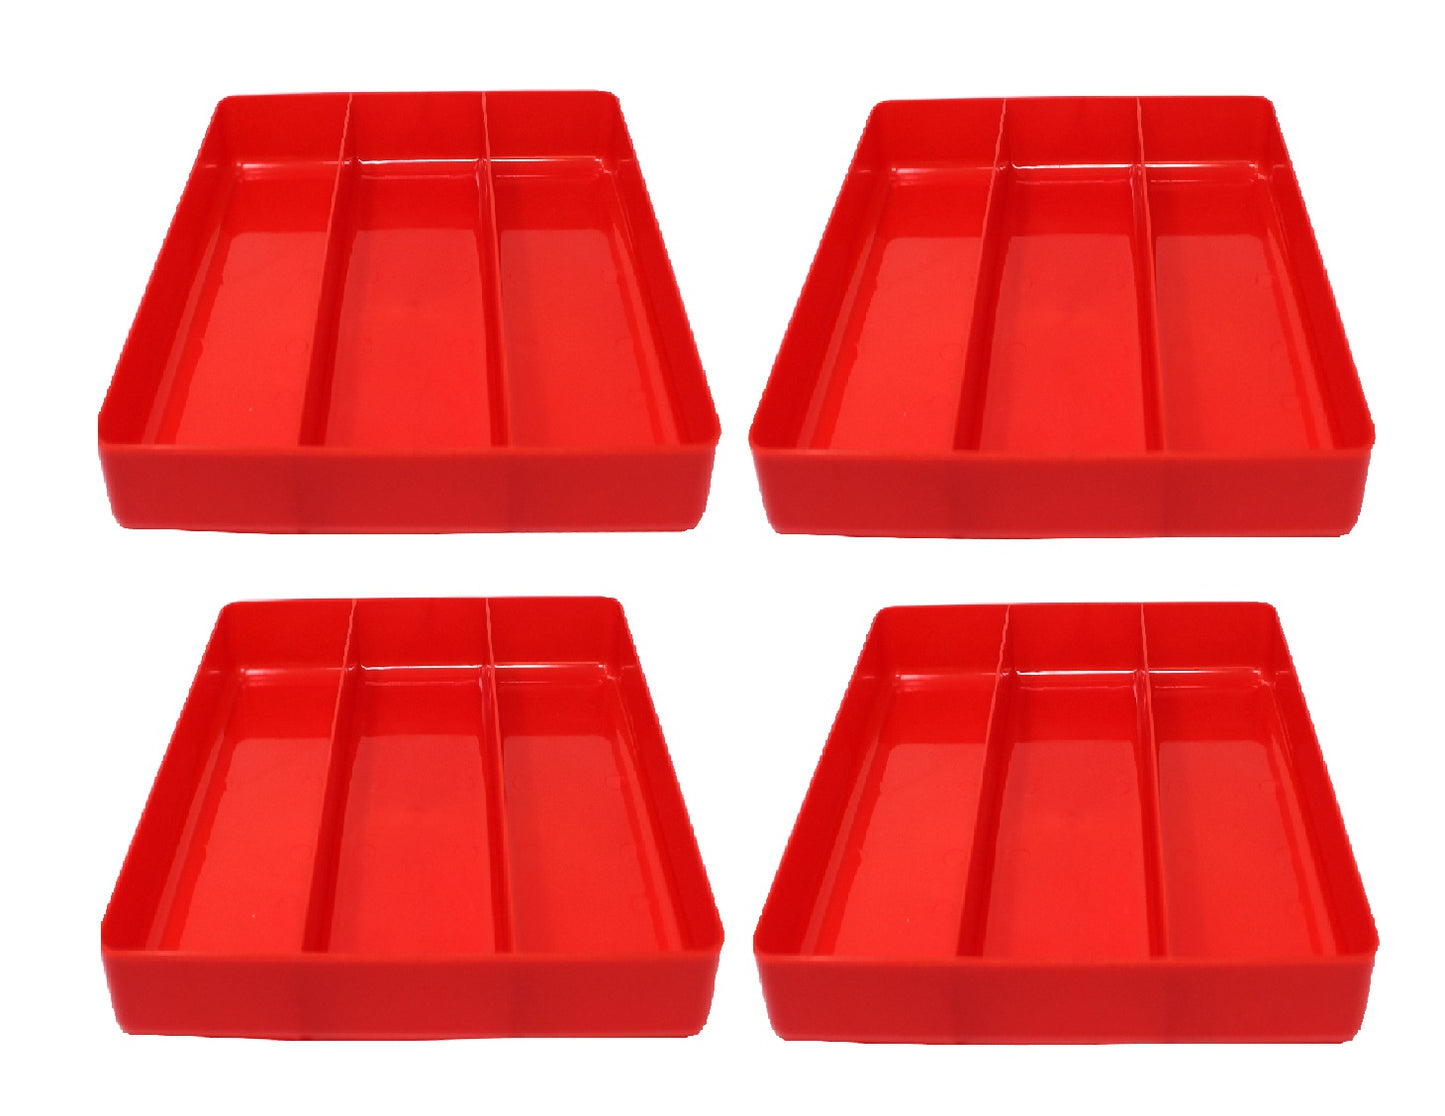 JSP Manufacturing Stackable Lightweight 3 Compartment Organizer Tray - Black or Red